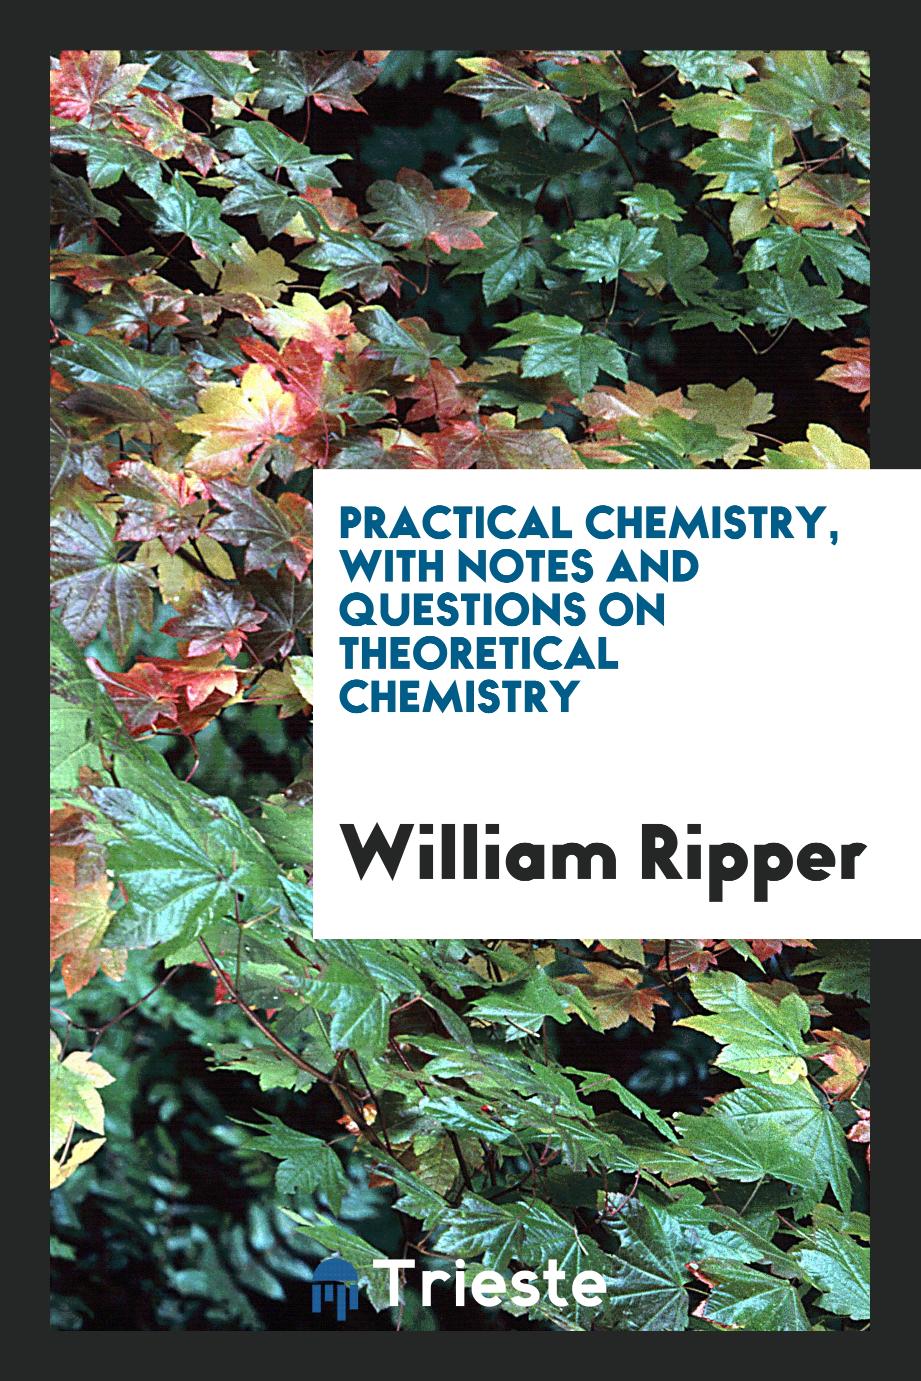 Practical Chemistry, with Notes and Questions on Theoretical Chemistry